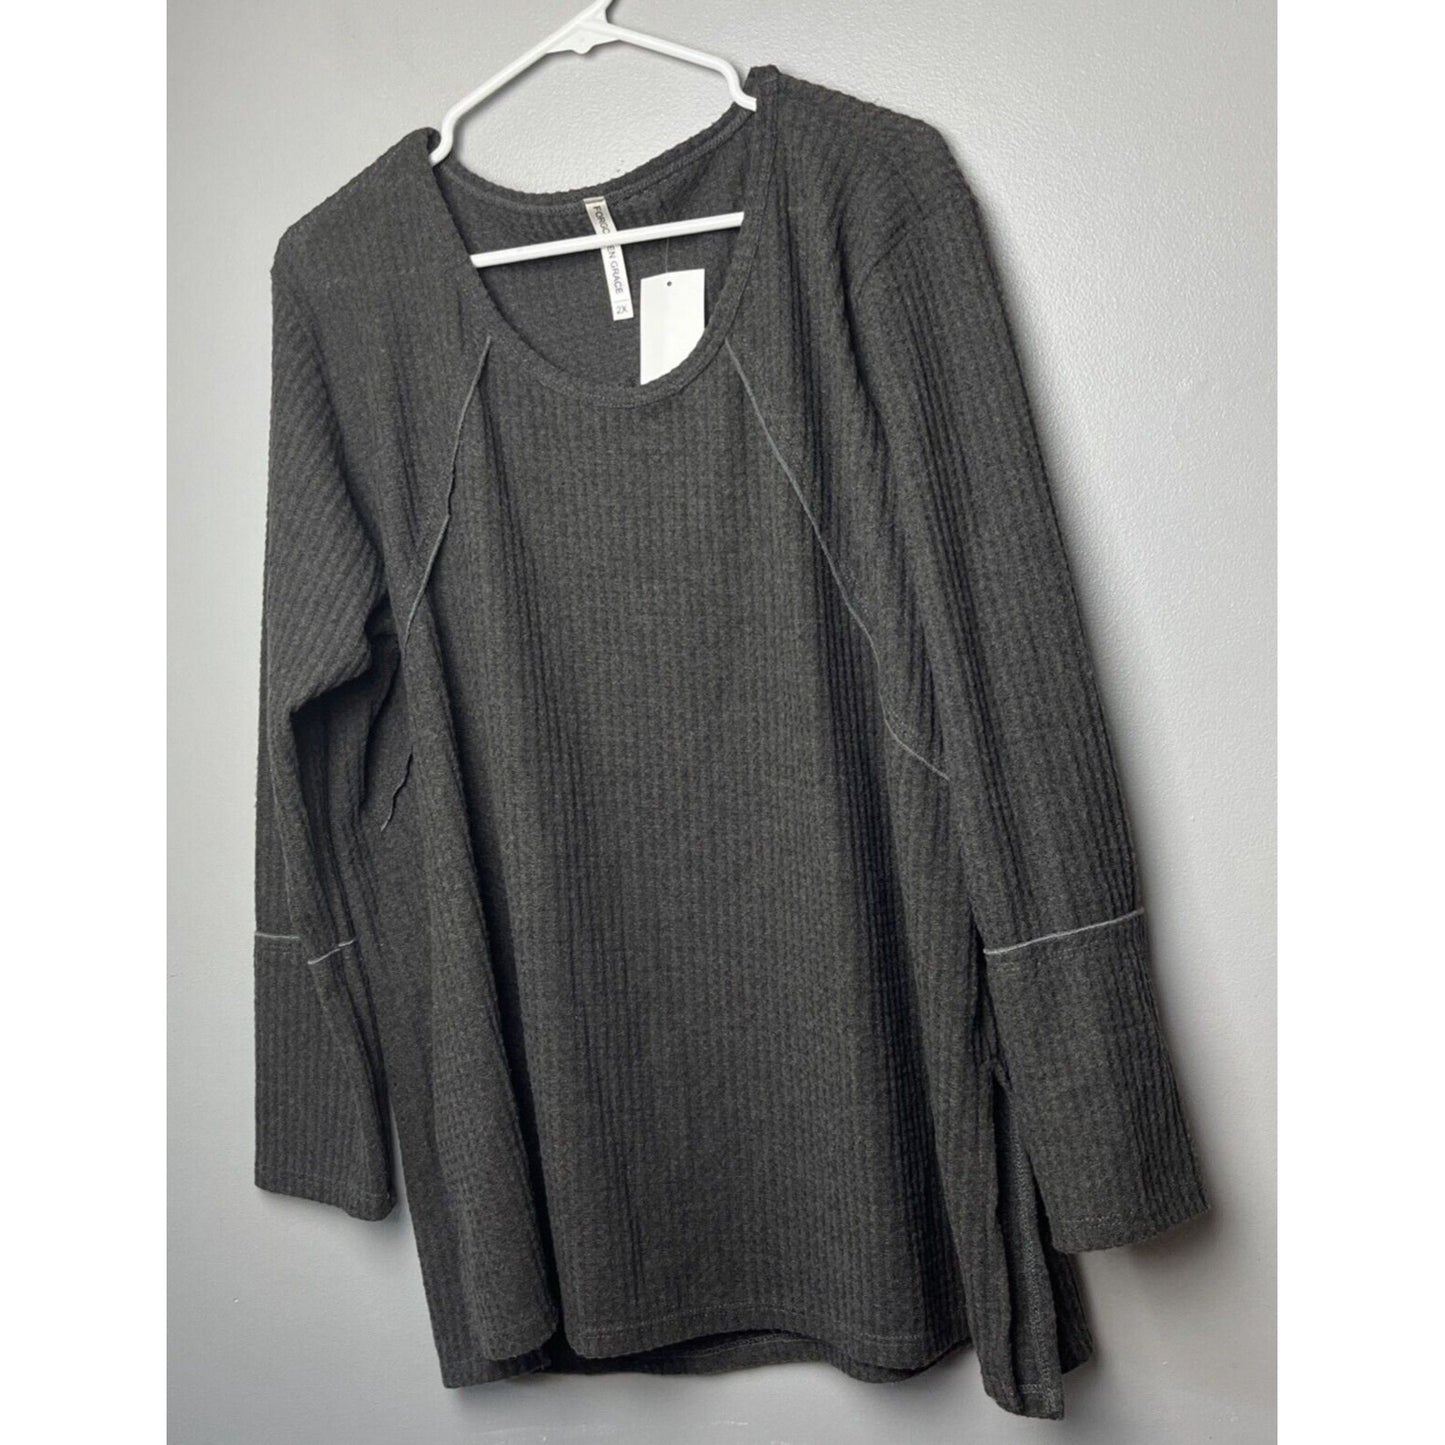 NWT Forgotten Grace Women Plus Size 2X Long Sleeve Top Solid Gray